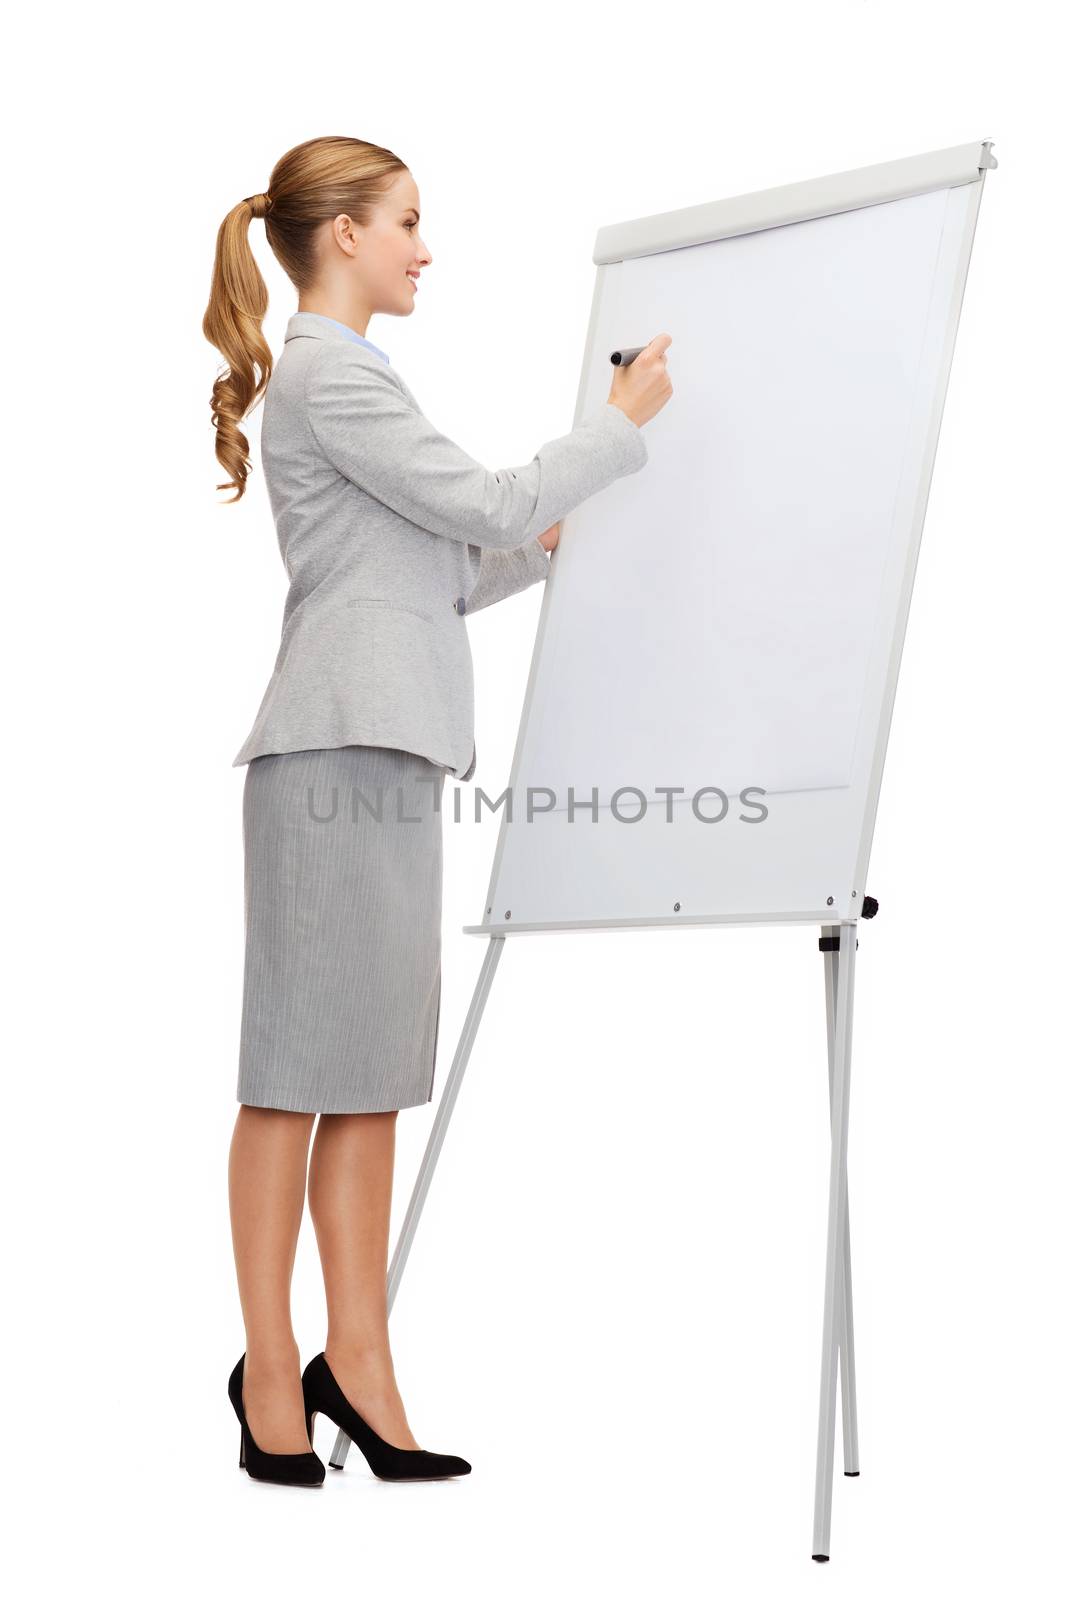 business, education and office concept - smiling businesswoman writing on flip board